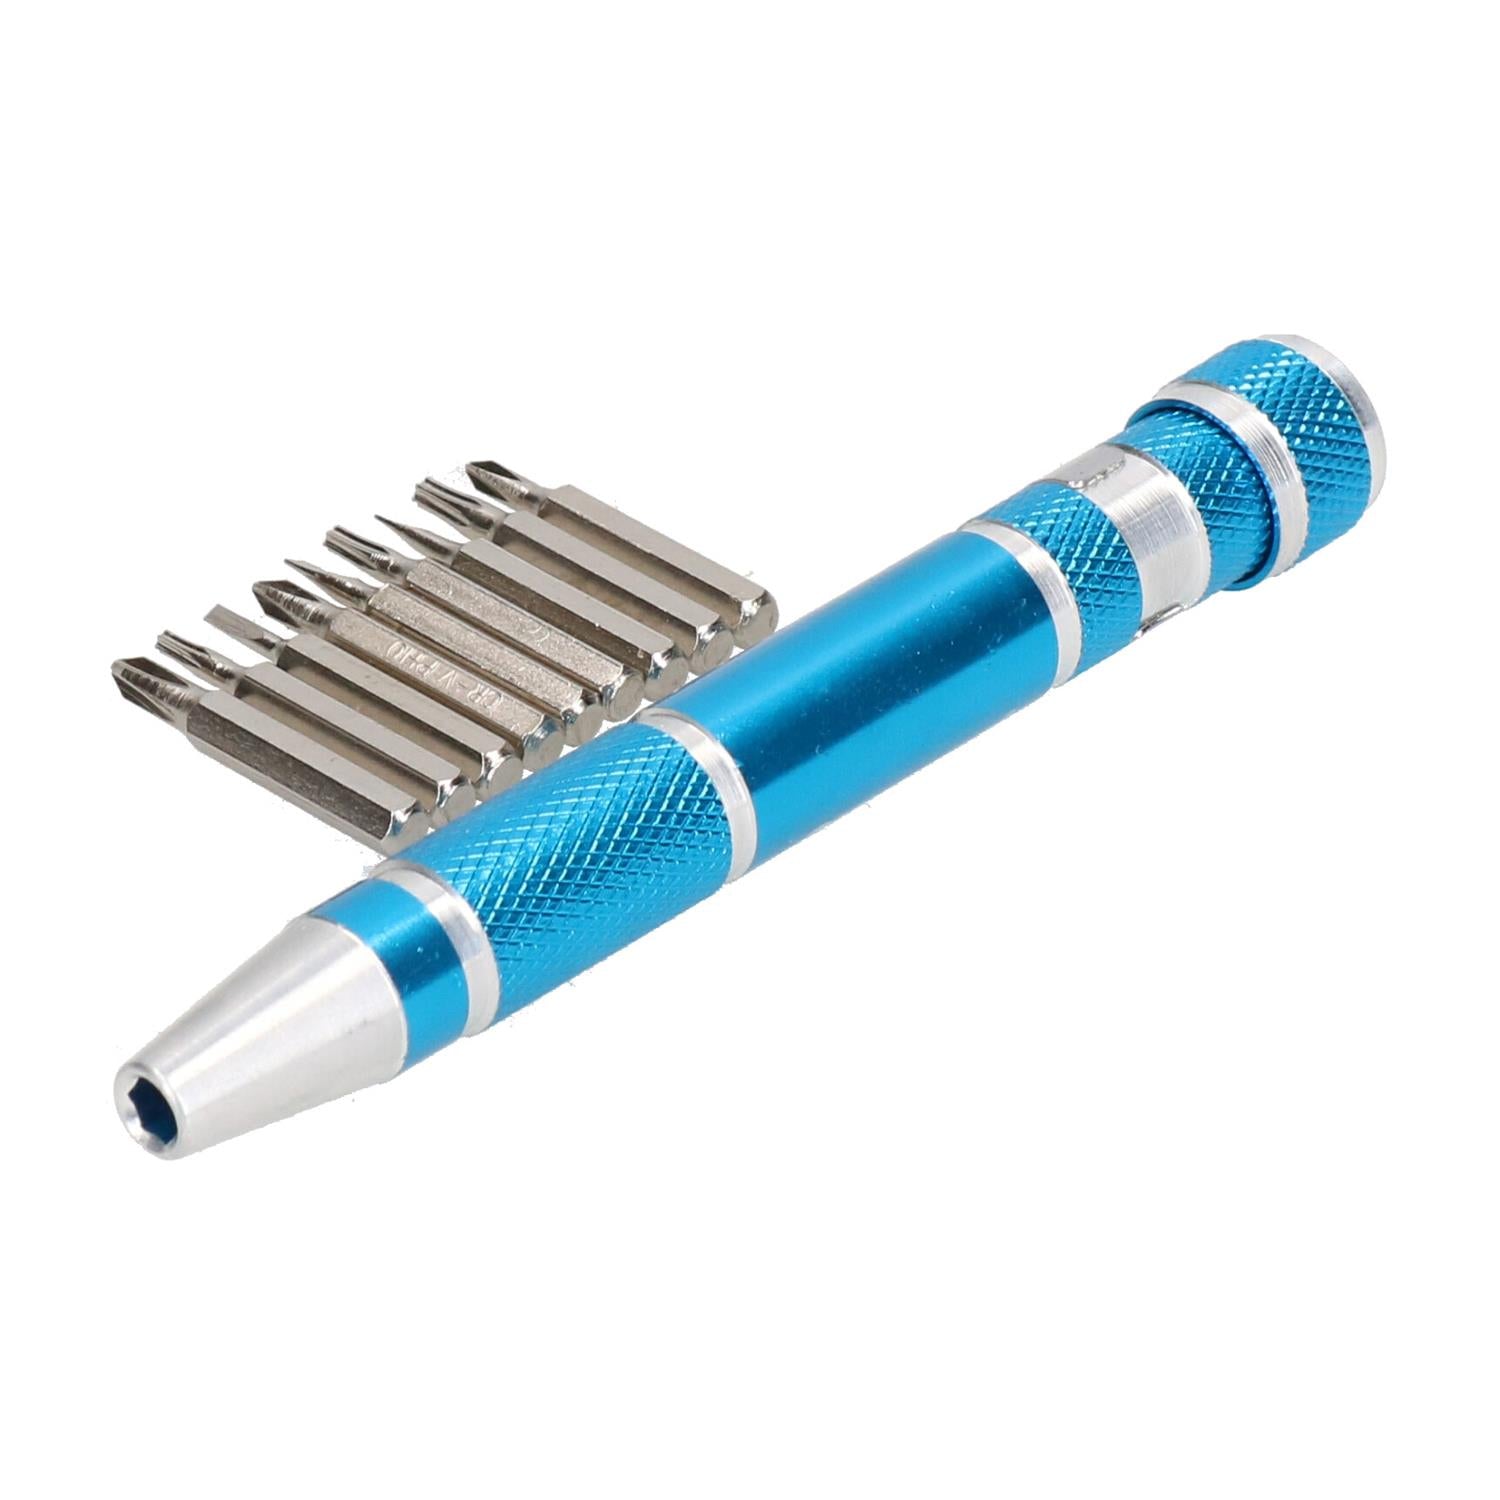 6 in 1 Precision Screwdriver Phillips Slotted Flathead Push Up Design Bit Set SIL249